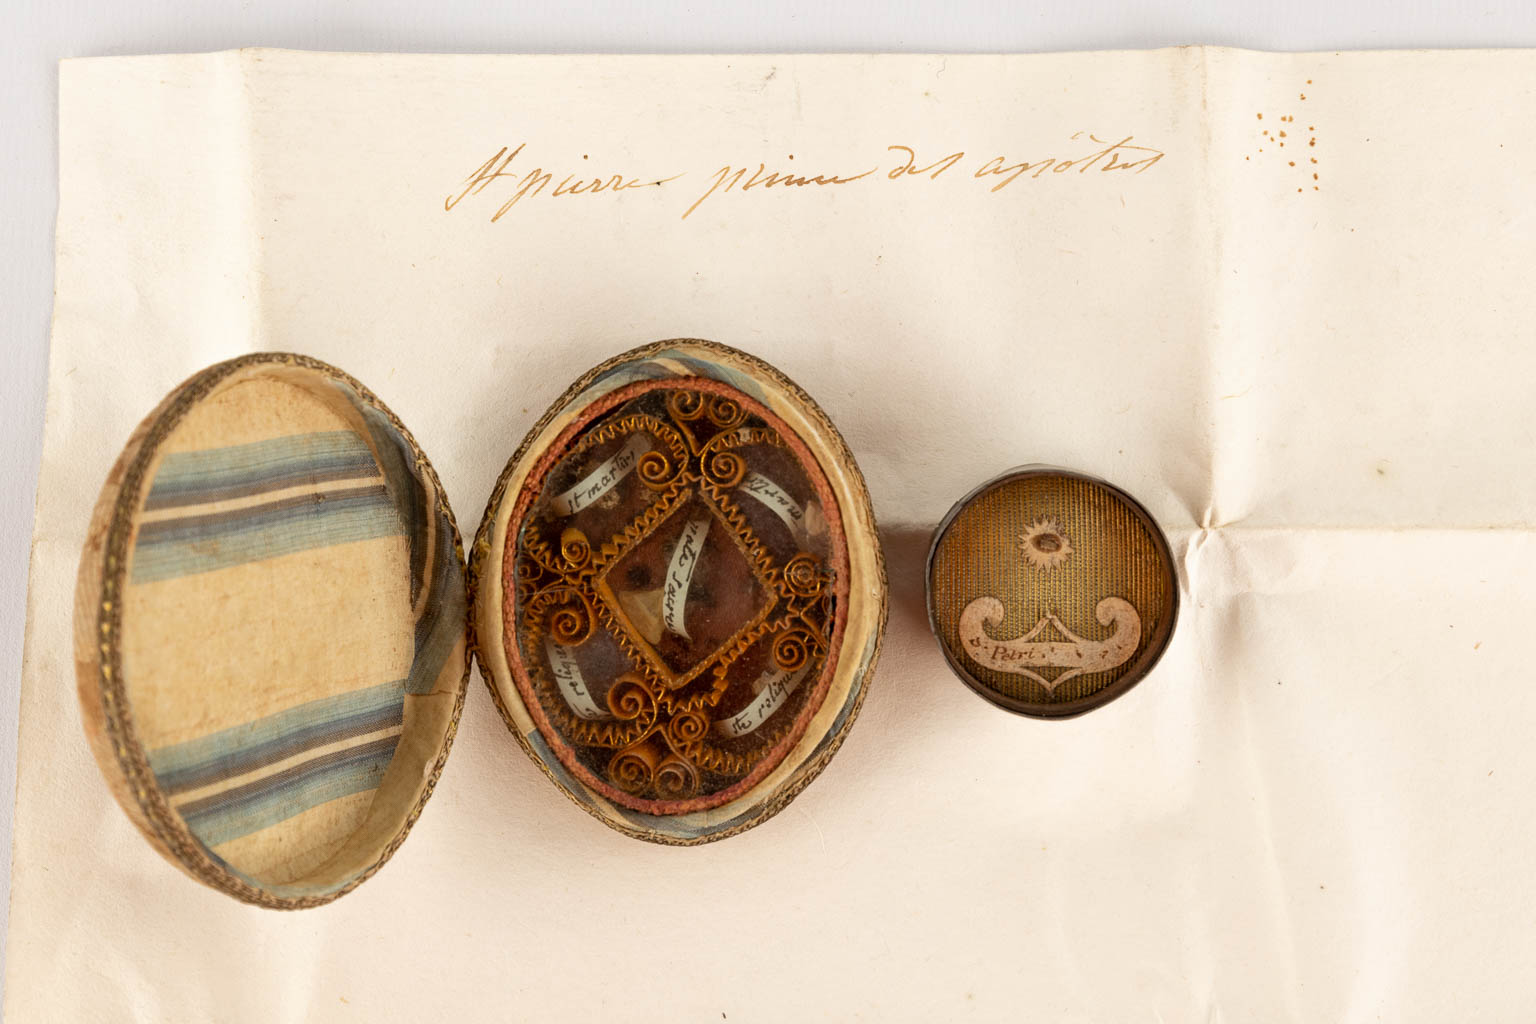 A Theca with a relic 'Ex Ligno Curcis V. Petri AP.' with document, missing the glass, added a theca with 5 relics. (D: